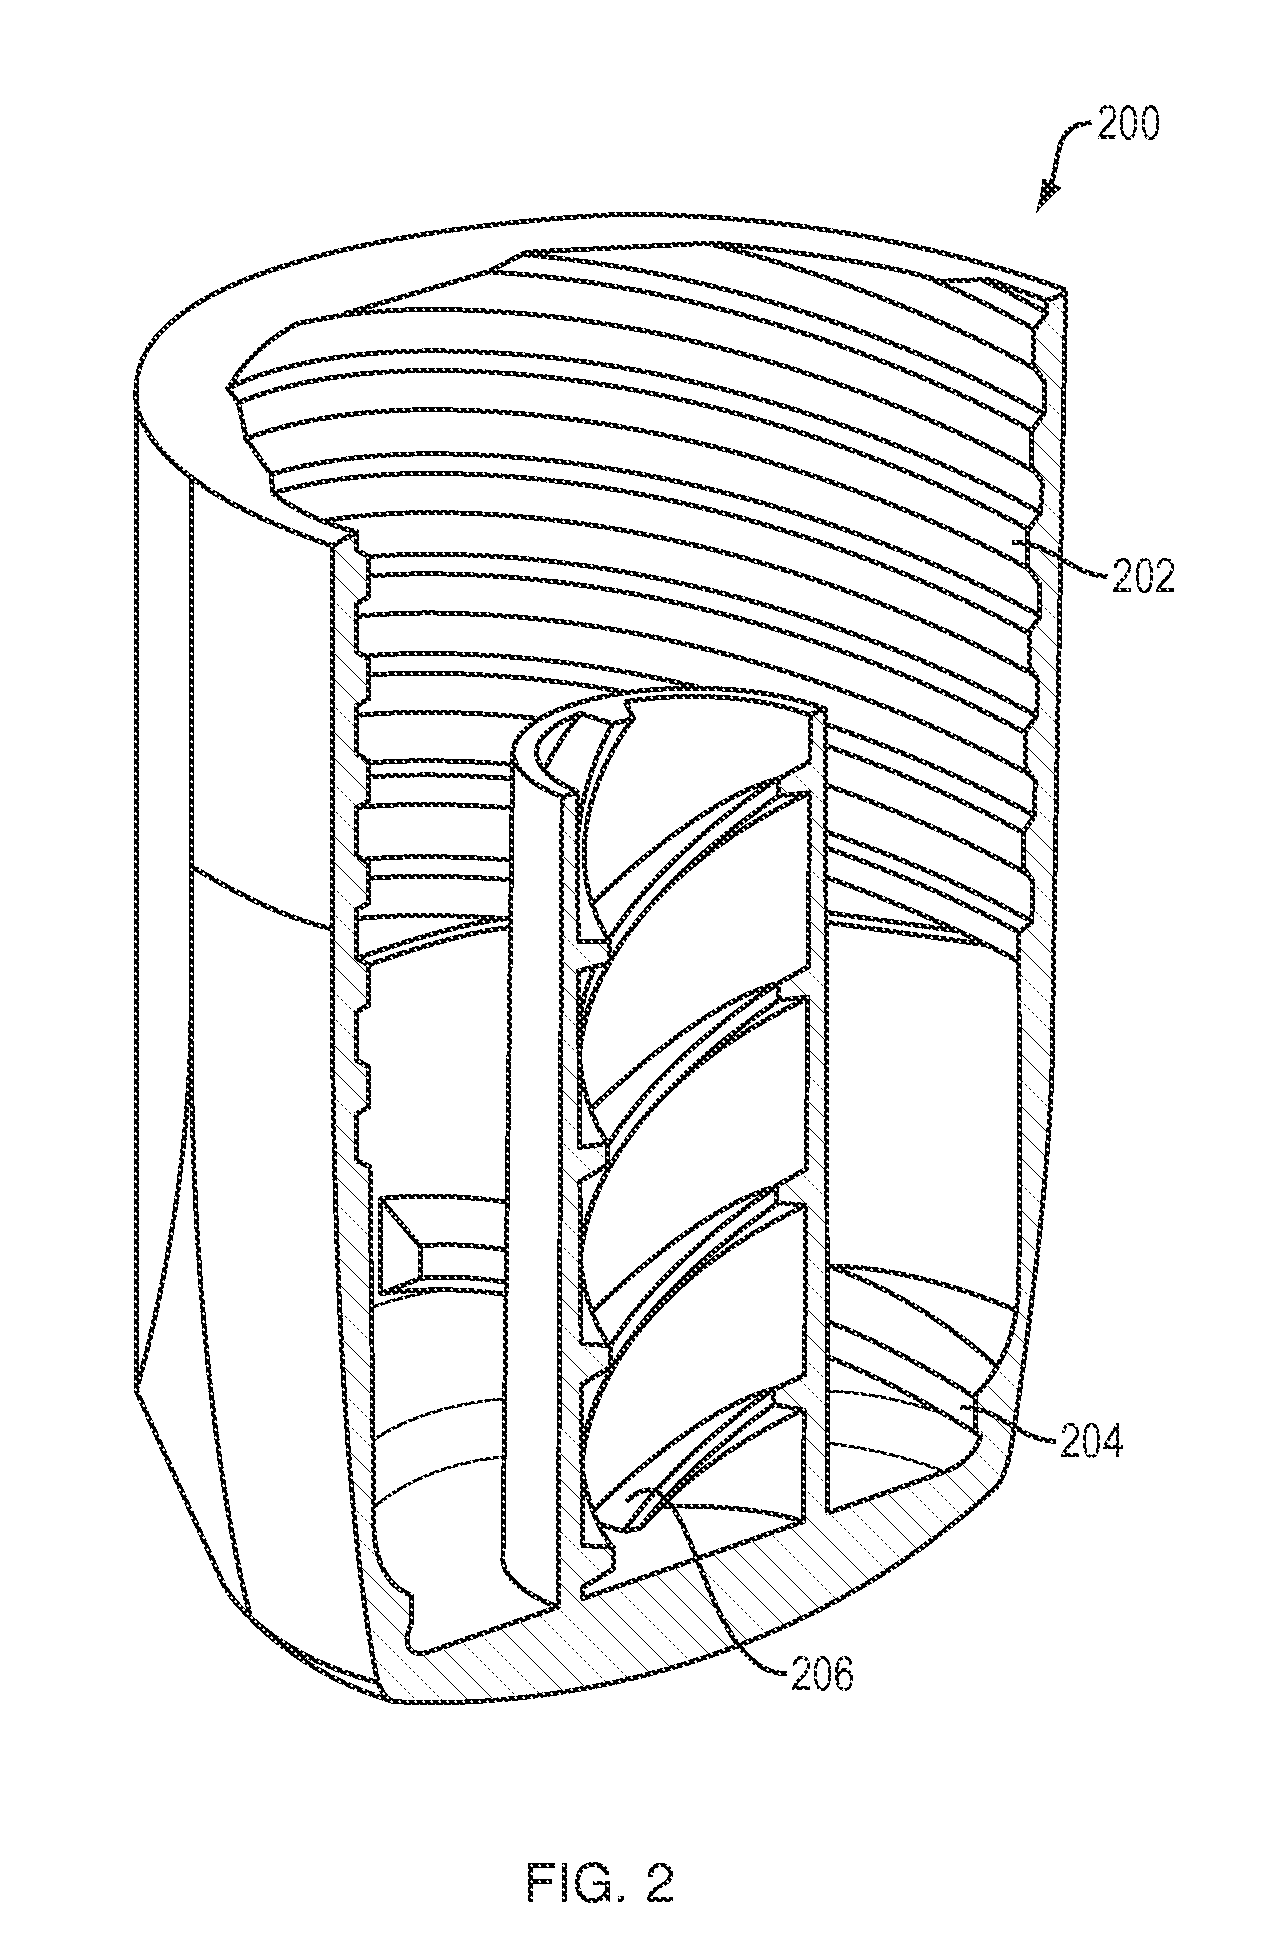 Needle assisted jet injection device having reduced trigger force